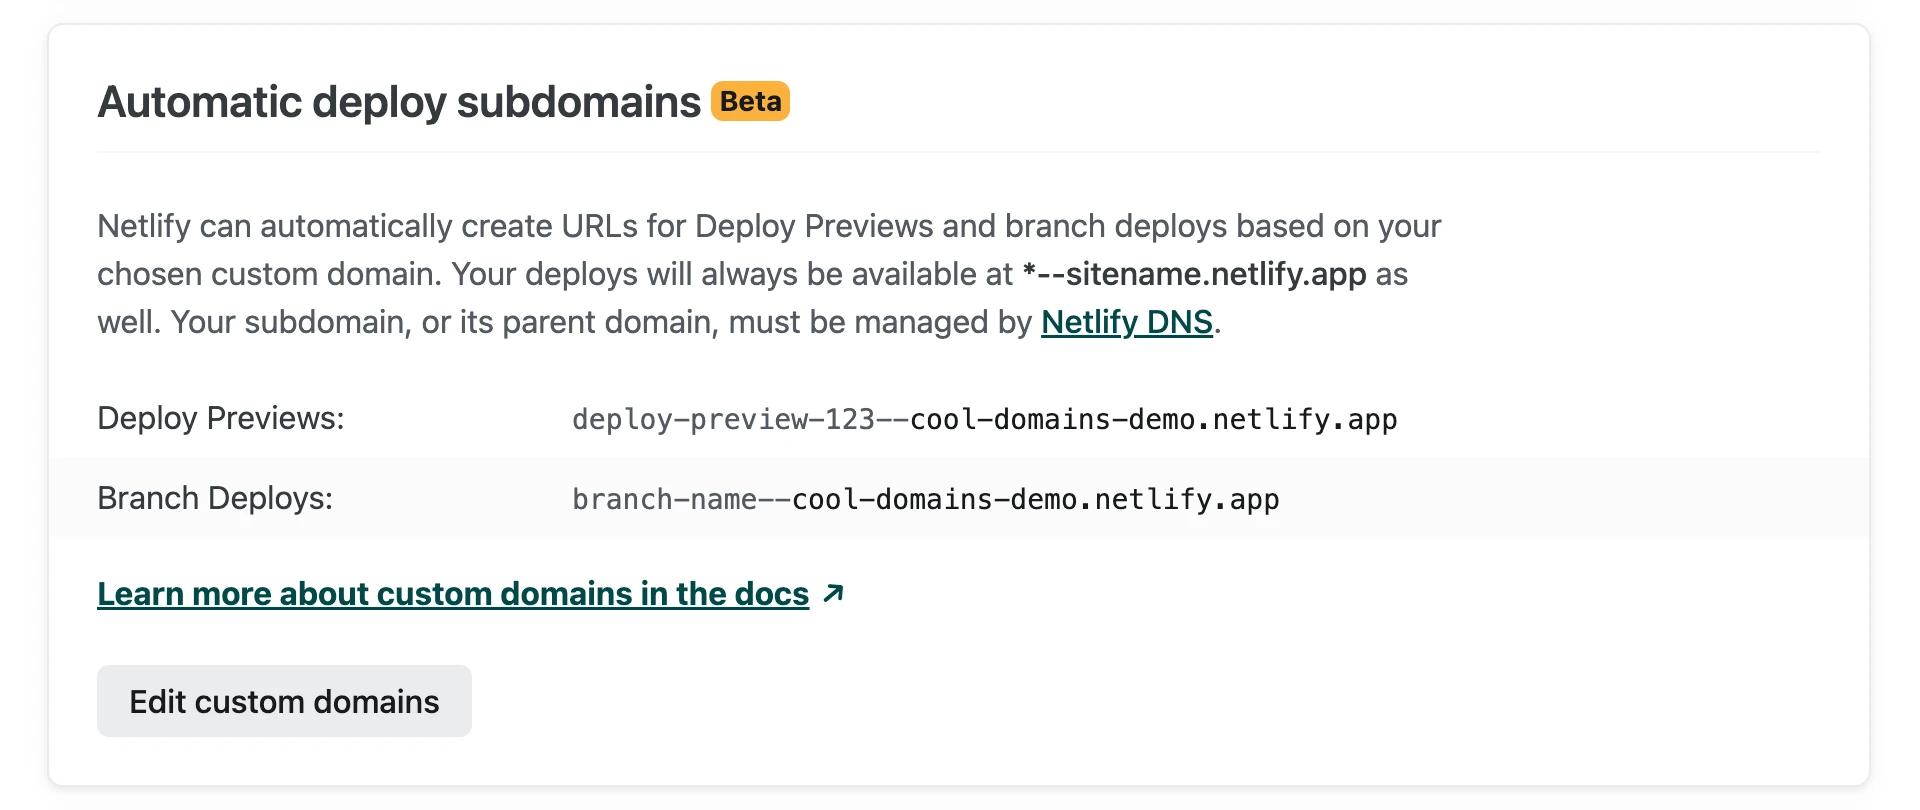 Deploy Previews and branch deploys are set to use netlify.app URLs by default